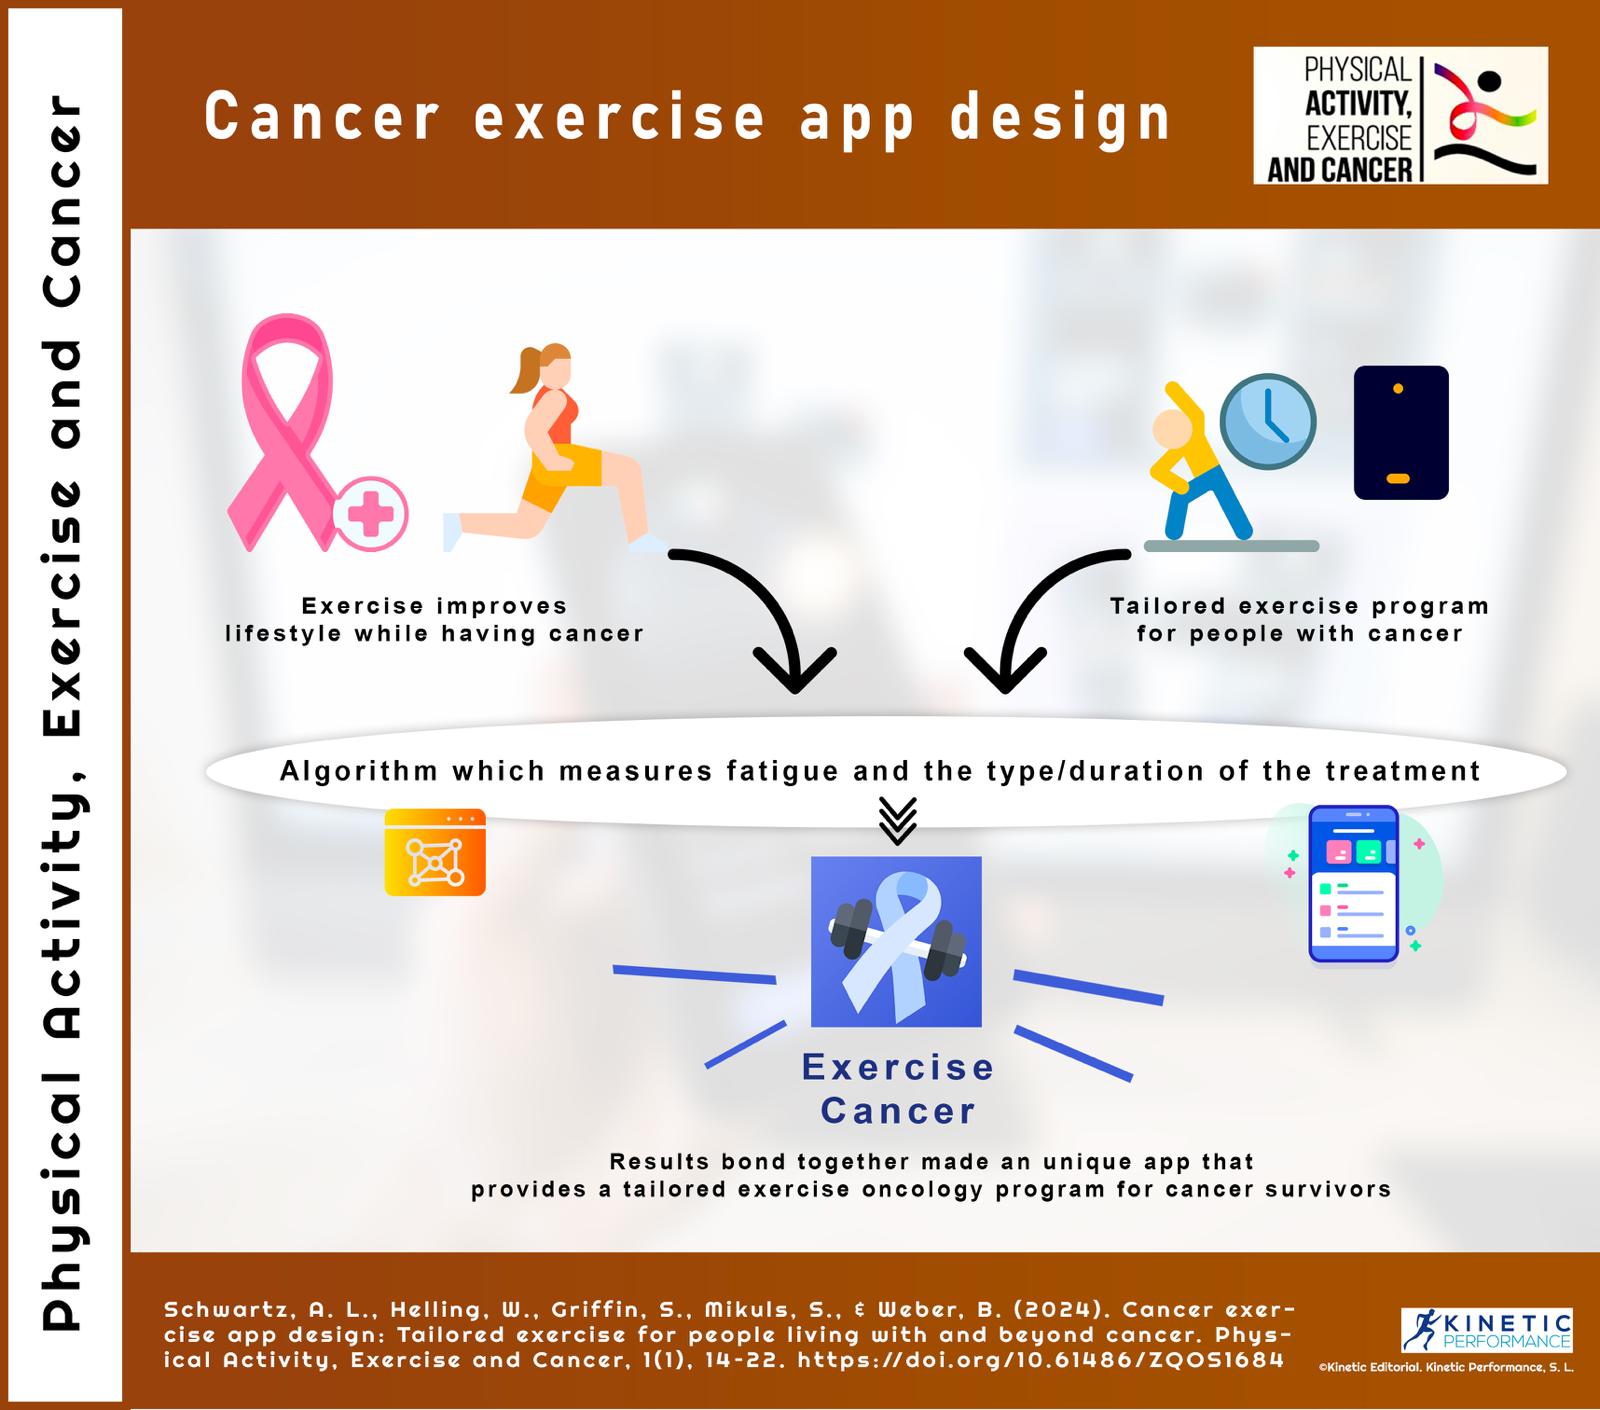 Cancer exercise app design: Tailored exercise for people living with and beyond cancer